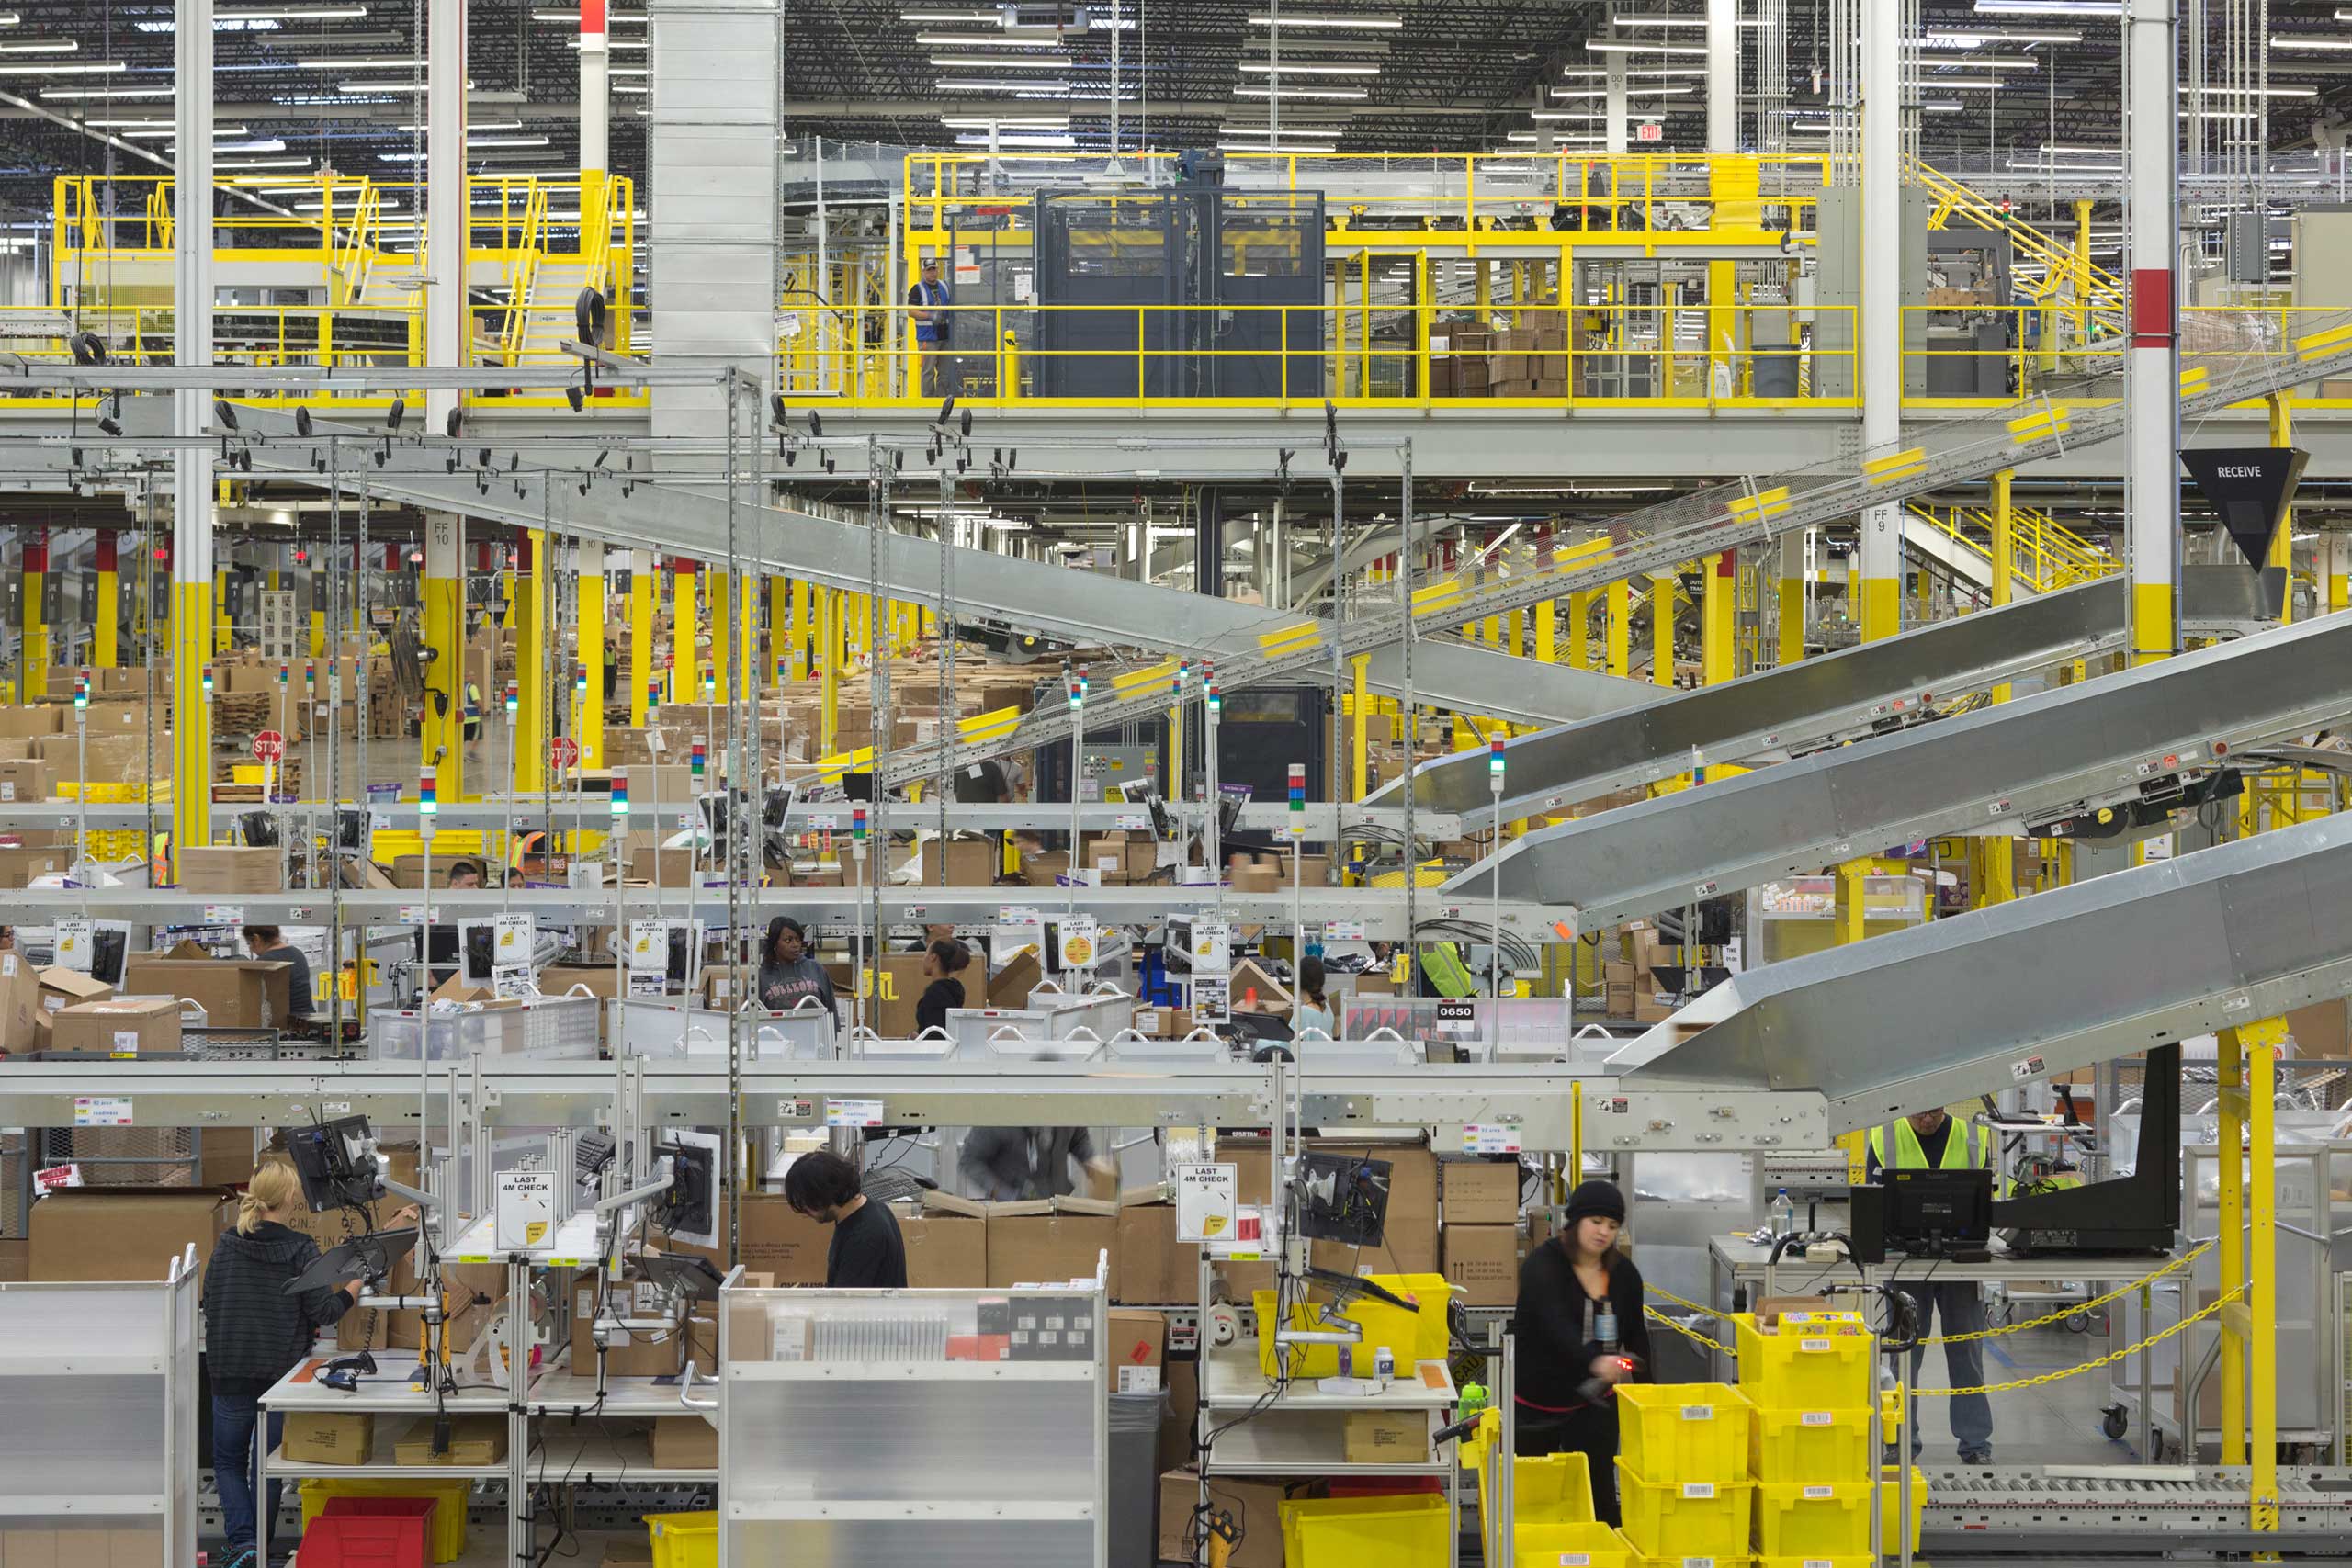 The packaging process at the Amazon fulfillment center in Tracy, Calif. on Nov. 21, 2014.